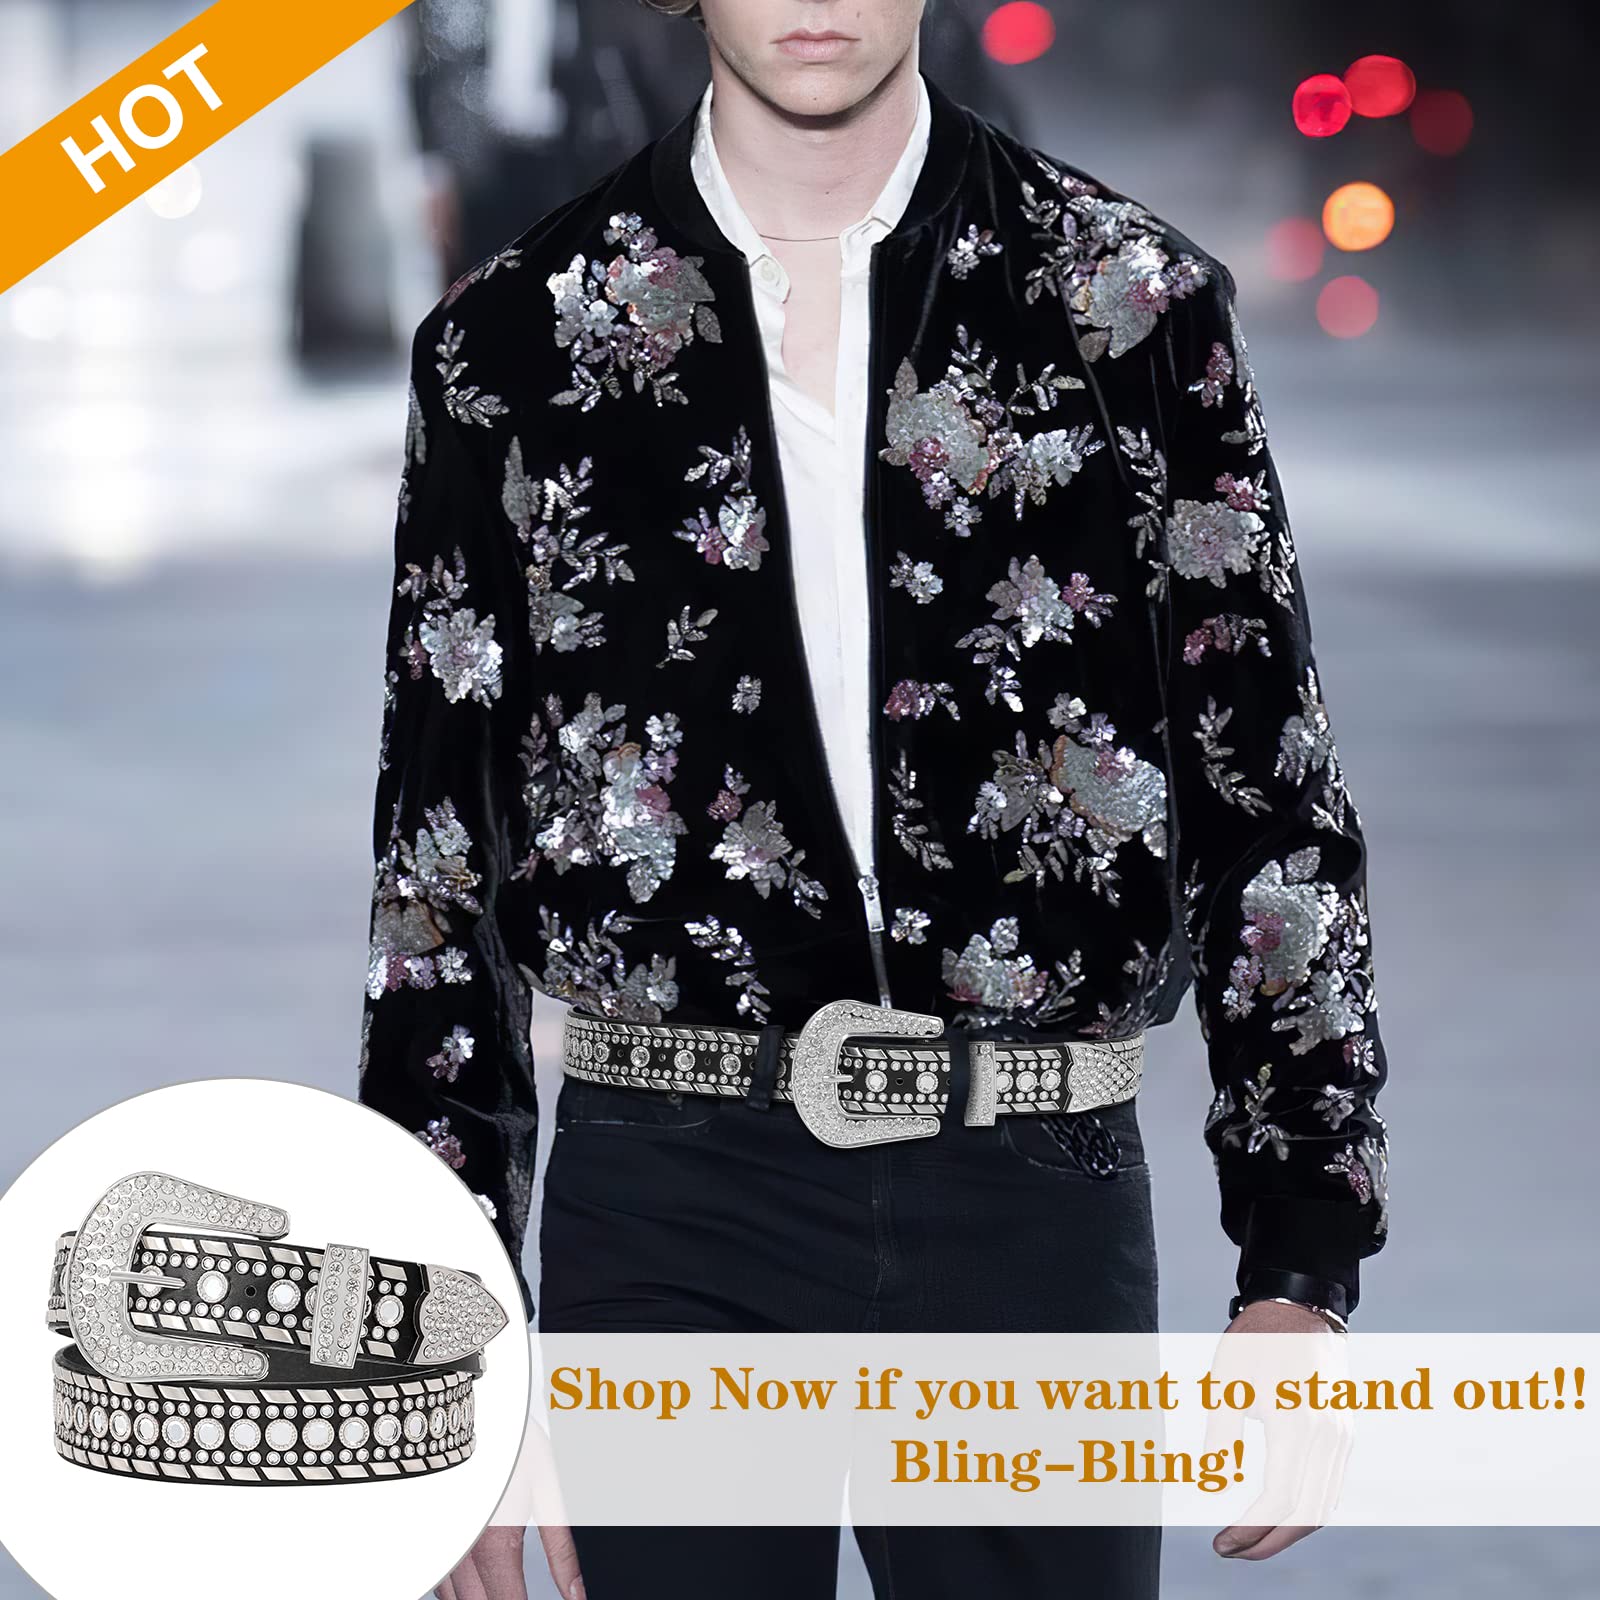 Rhinestone Belt for Women SUOSDEY Western Cowgirl Bling Studded Leather Belt for Jeans Pants 